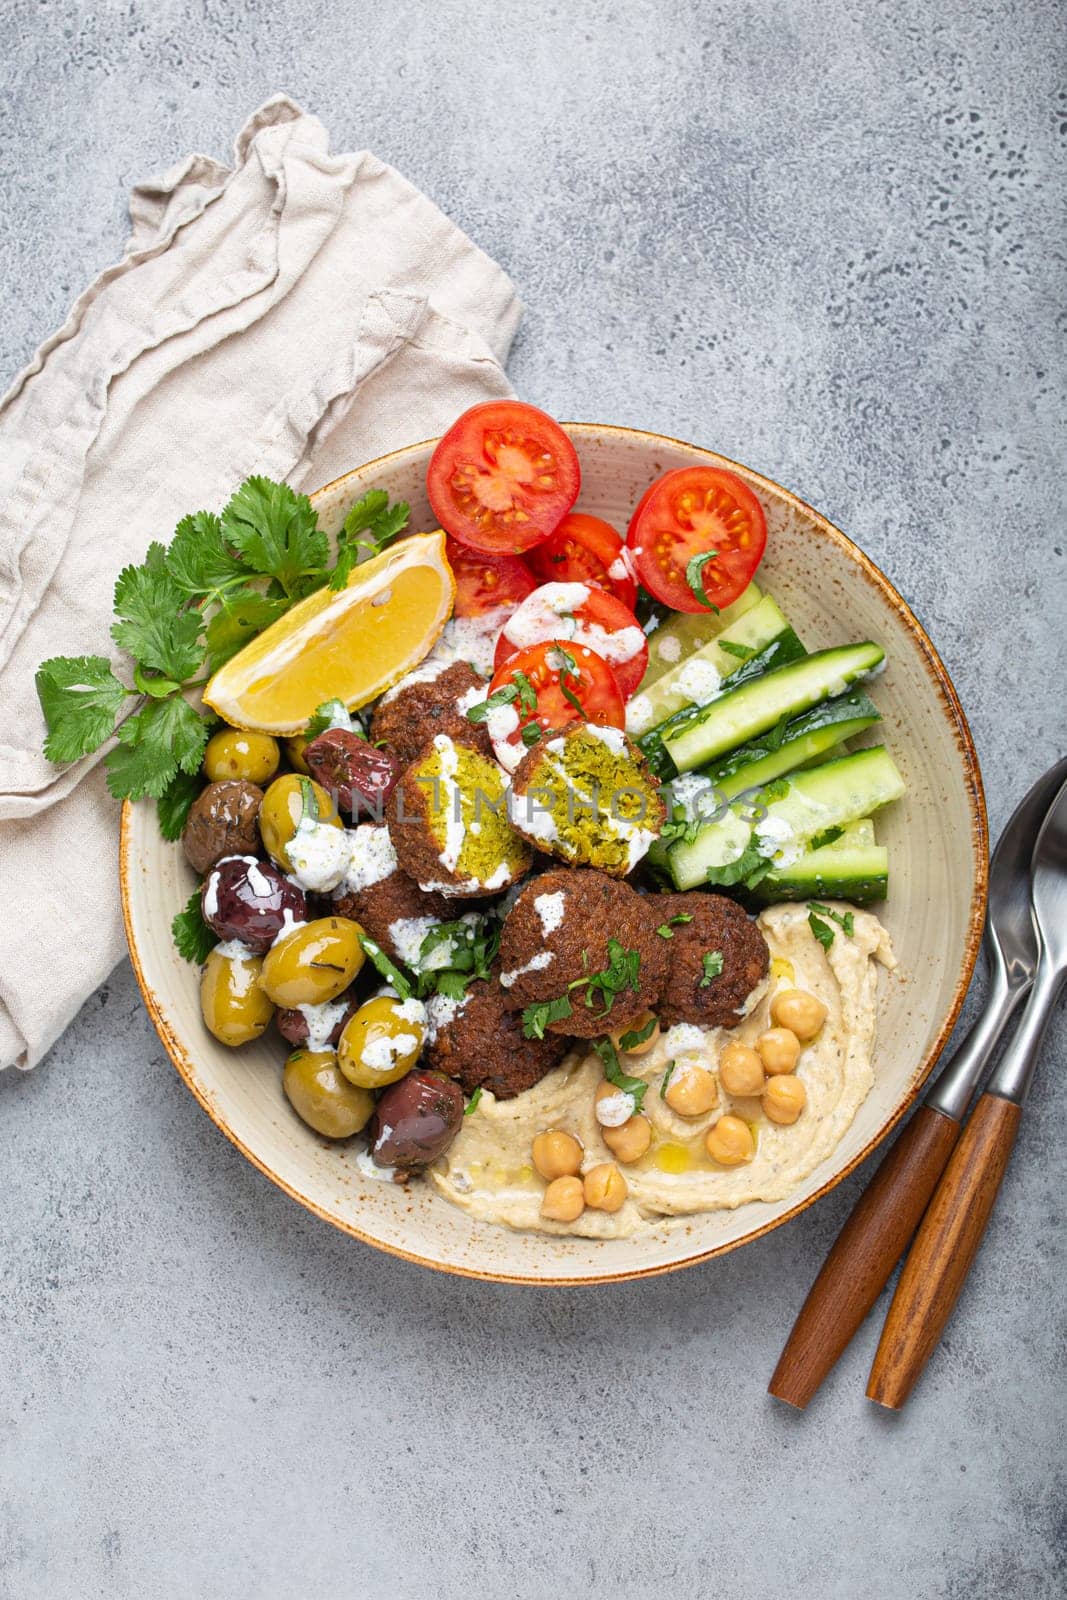 Falafel salad bowl with hummus, vegetables, olives and herbs. Vegan lunch plate top view, rustic stone background, healthy meal with falafel and veggies by its_al_dente